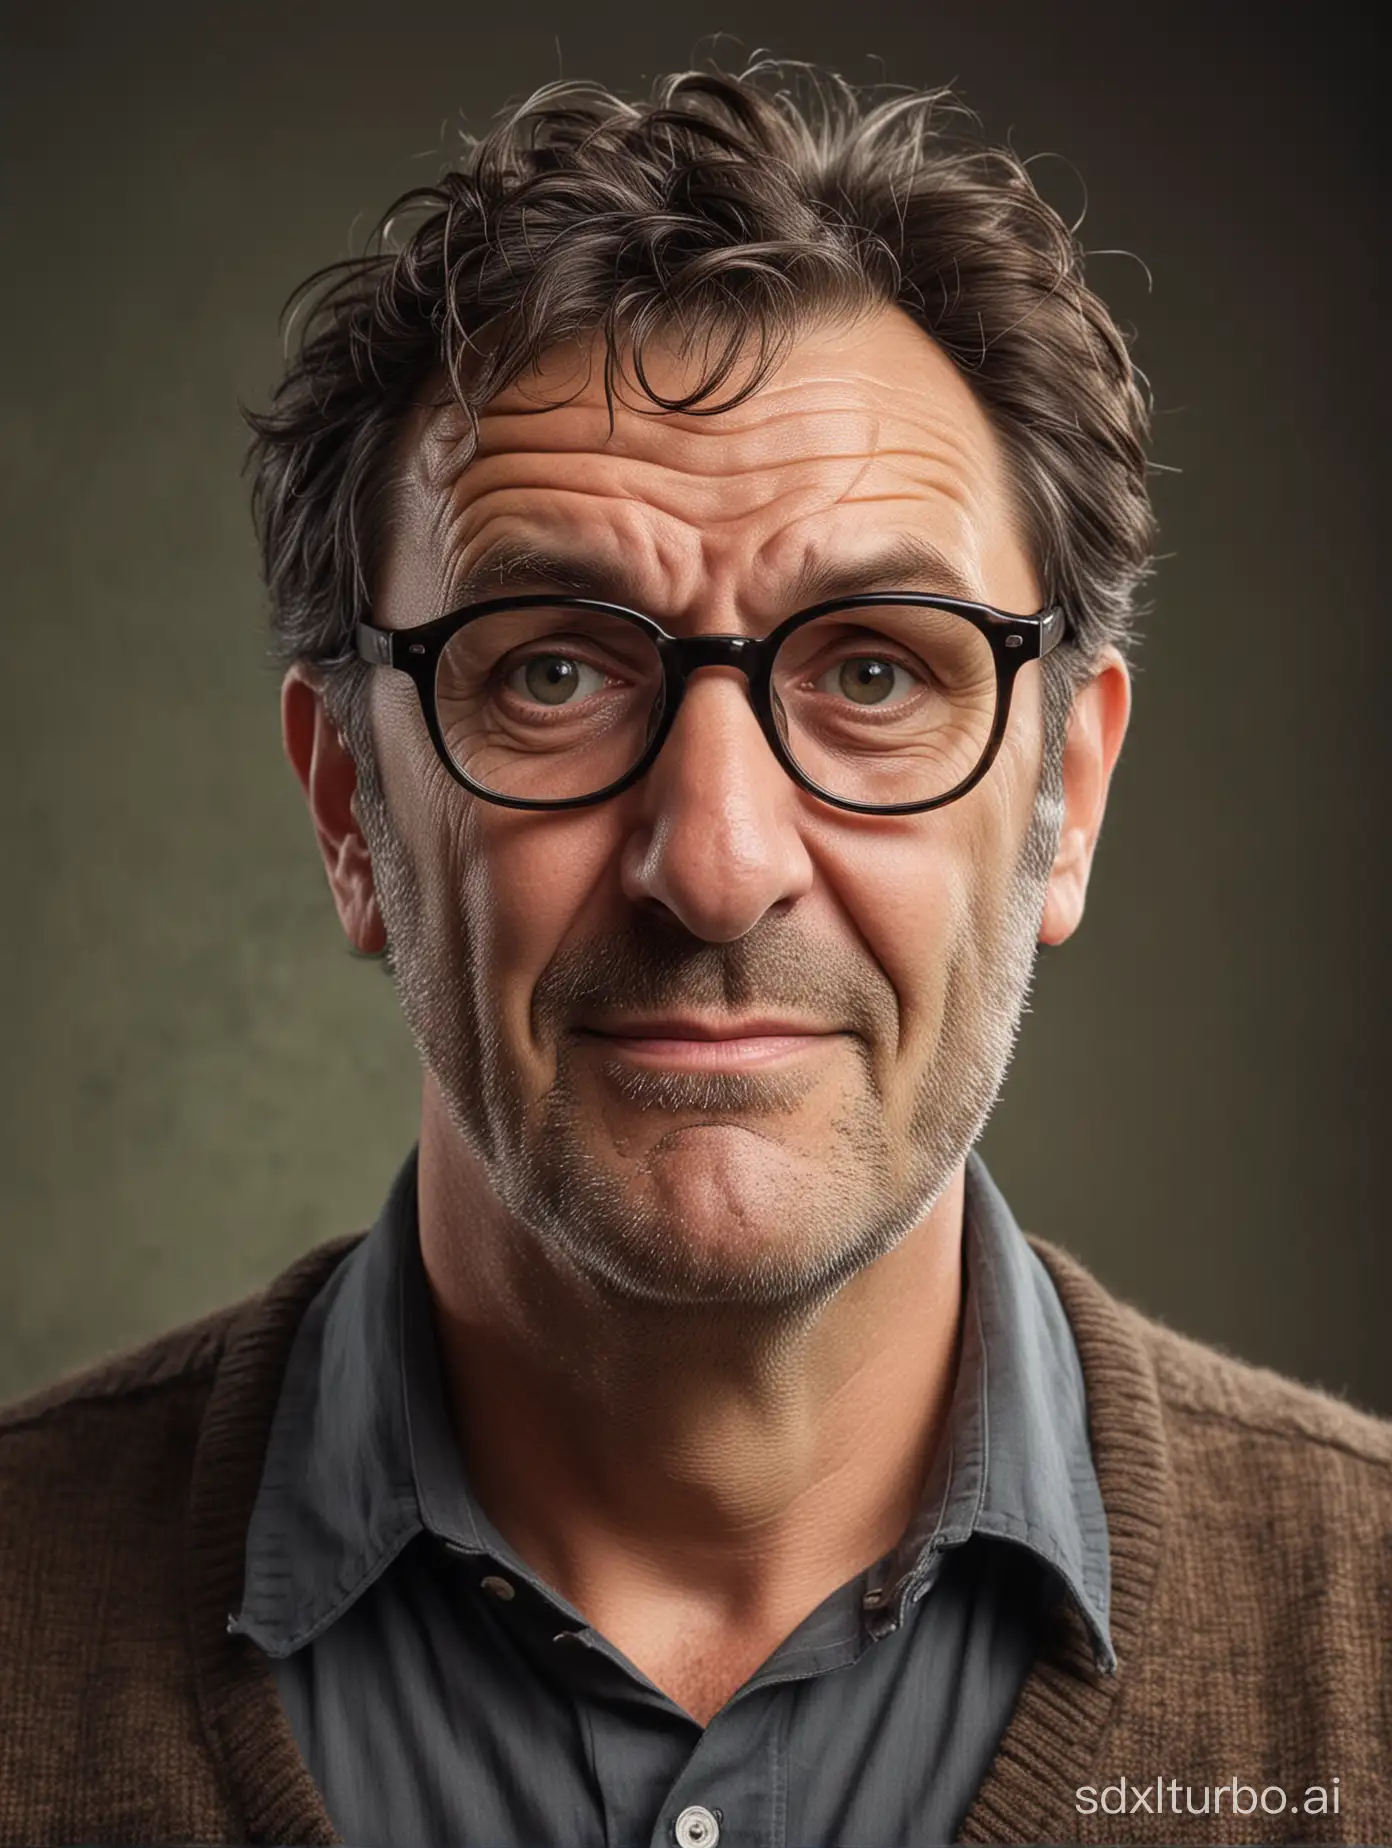 A funny, middle-aged greasy uncle, deep glasses